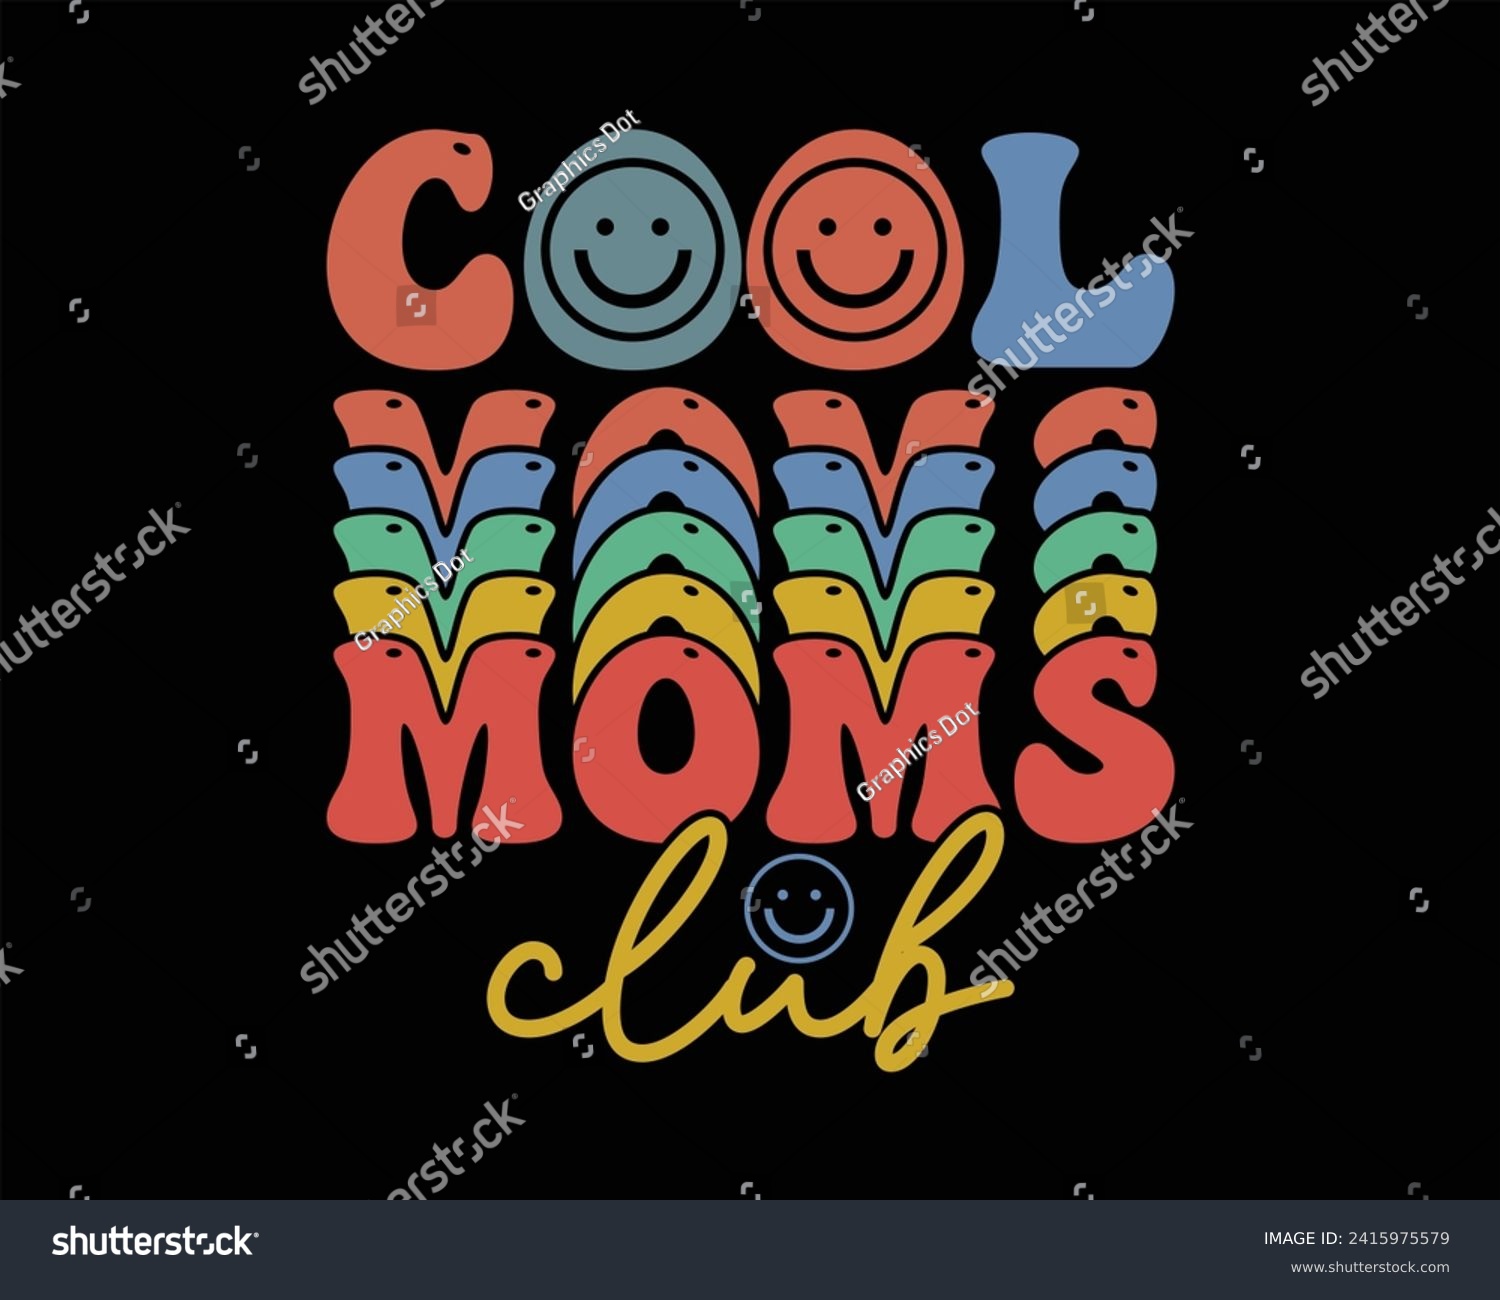 SVG of Cool Moms Club Retro Design,Cool moms club quote retro wavy colorful Design,Mom Cut File,Happy Mother's Day Design,Best Mom Day Design,gift, lover svg